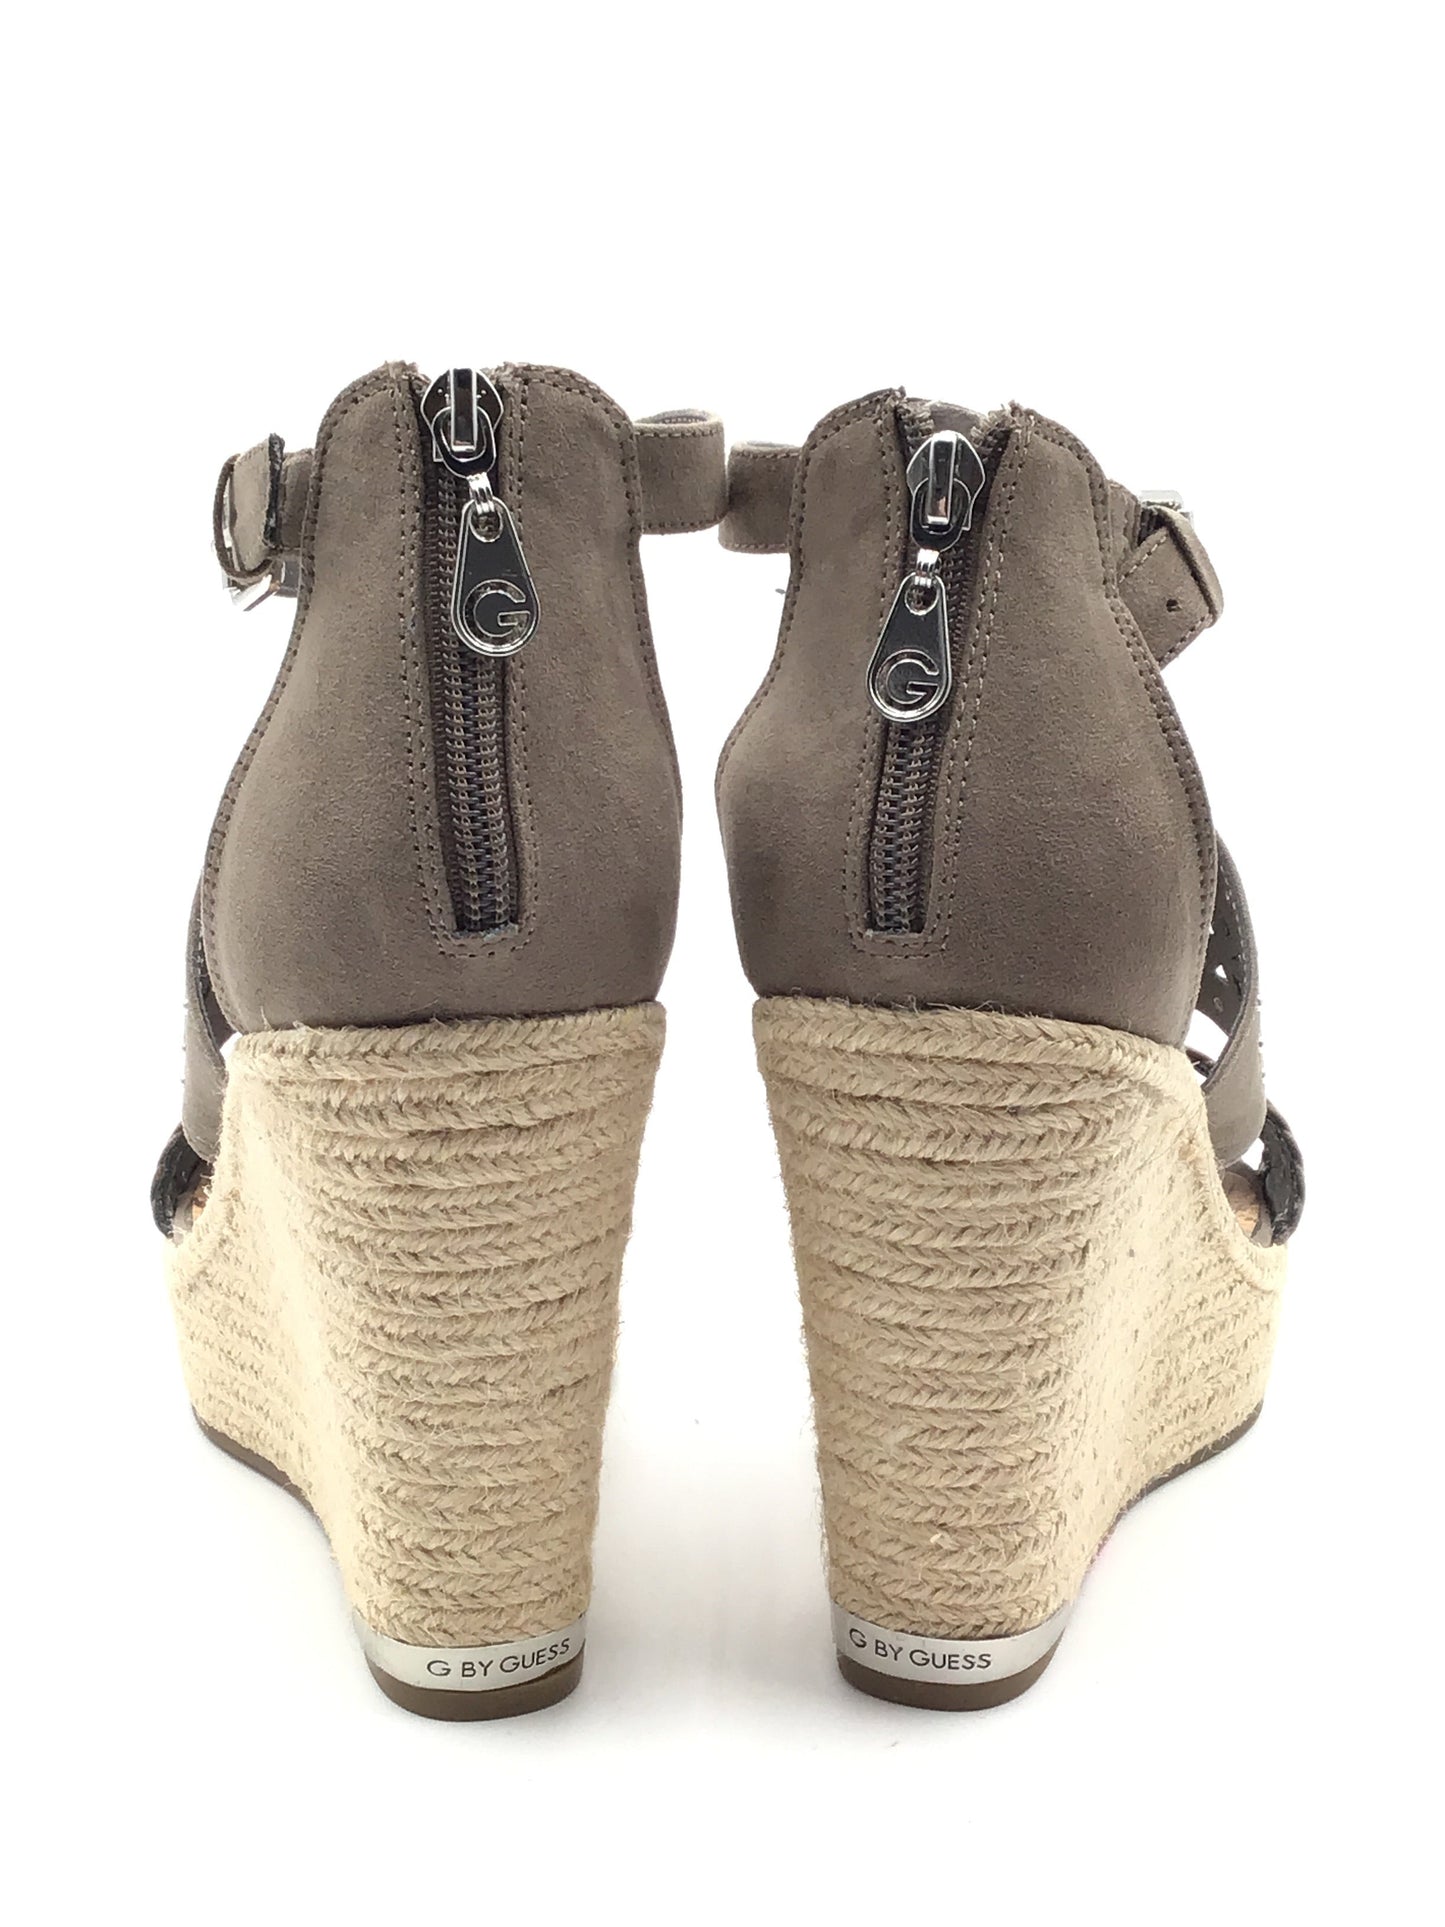 Shoes Heels Wedge By Guess  Size: 8.5